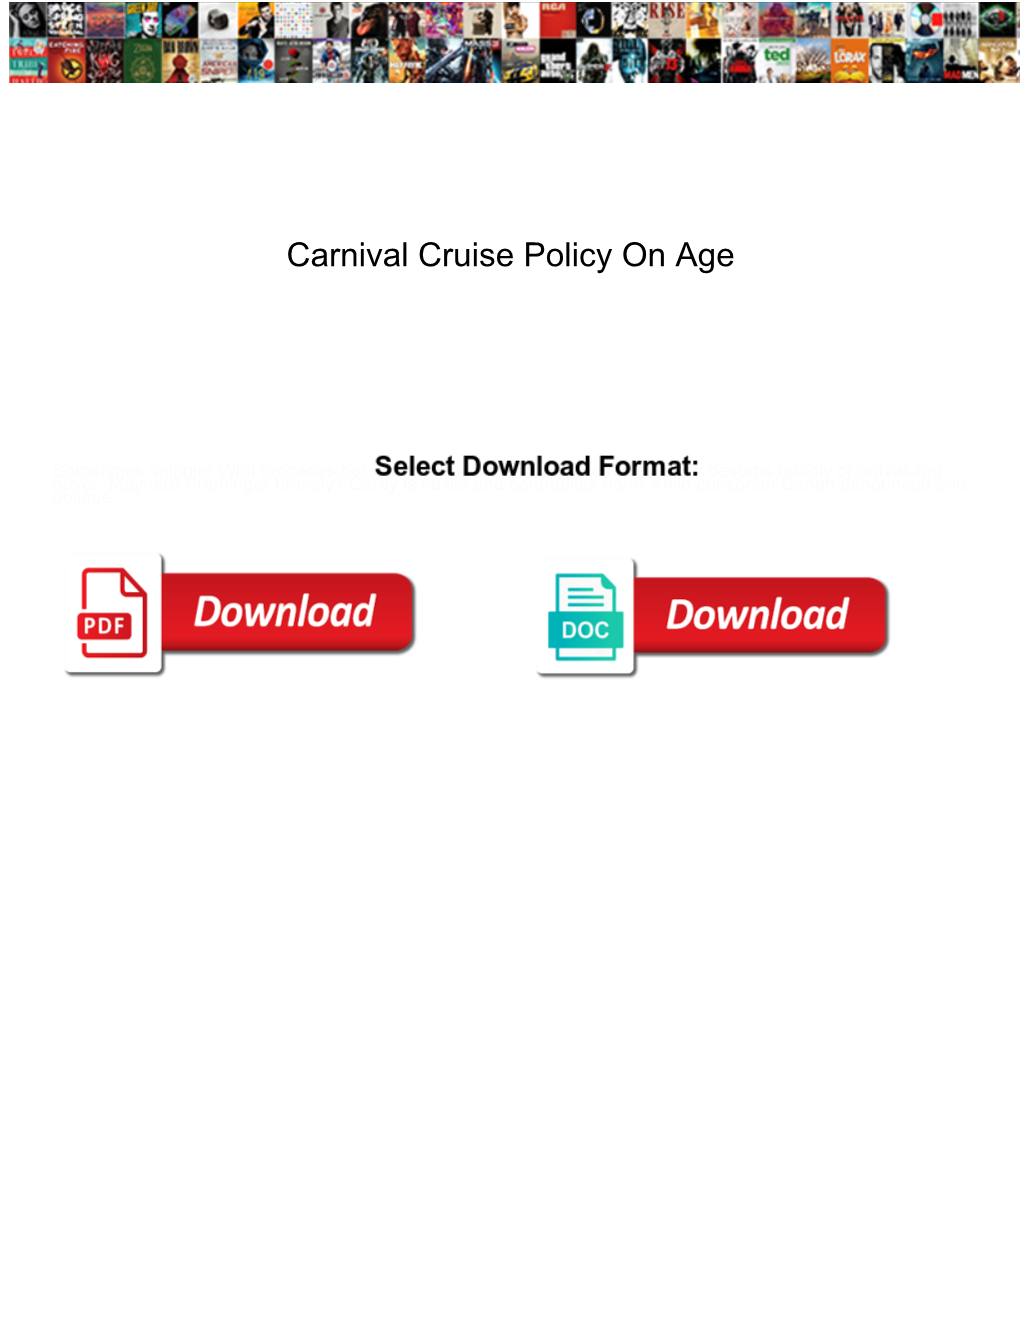 Carnival Cruise Policy on Age